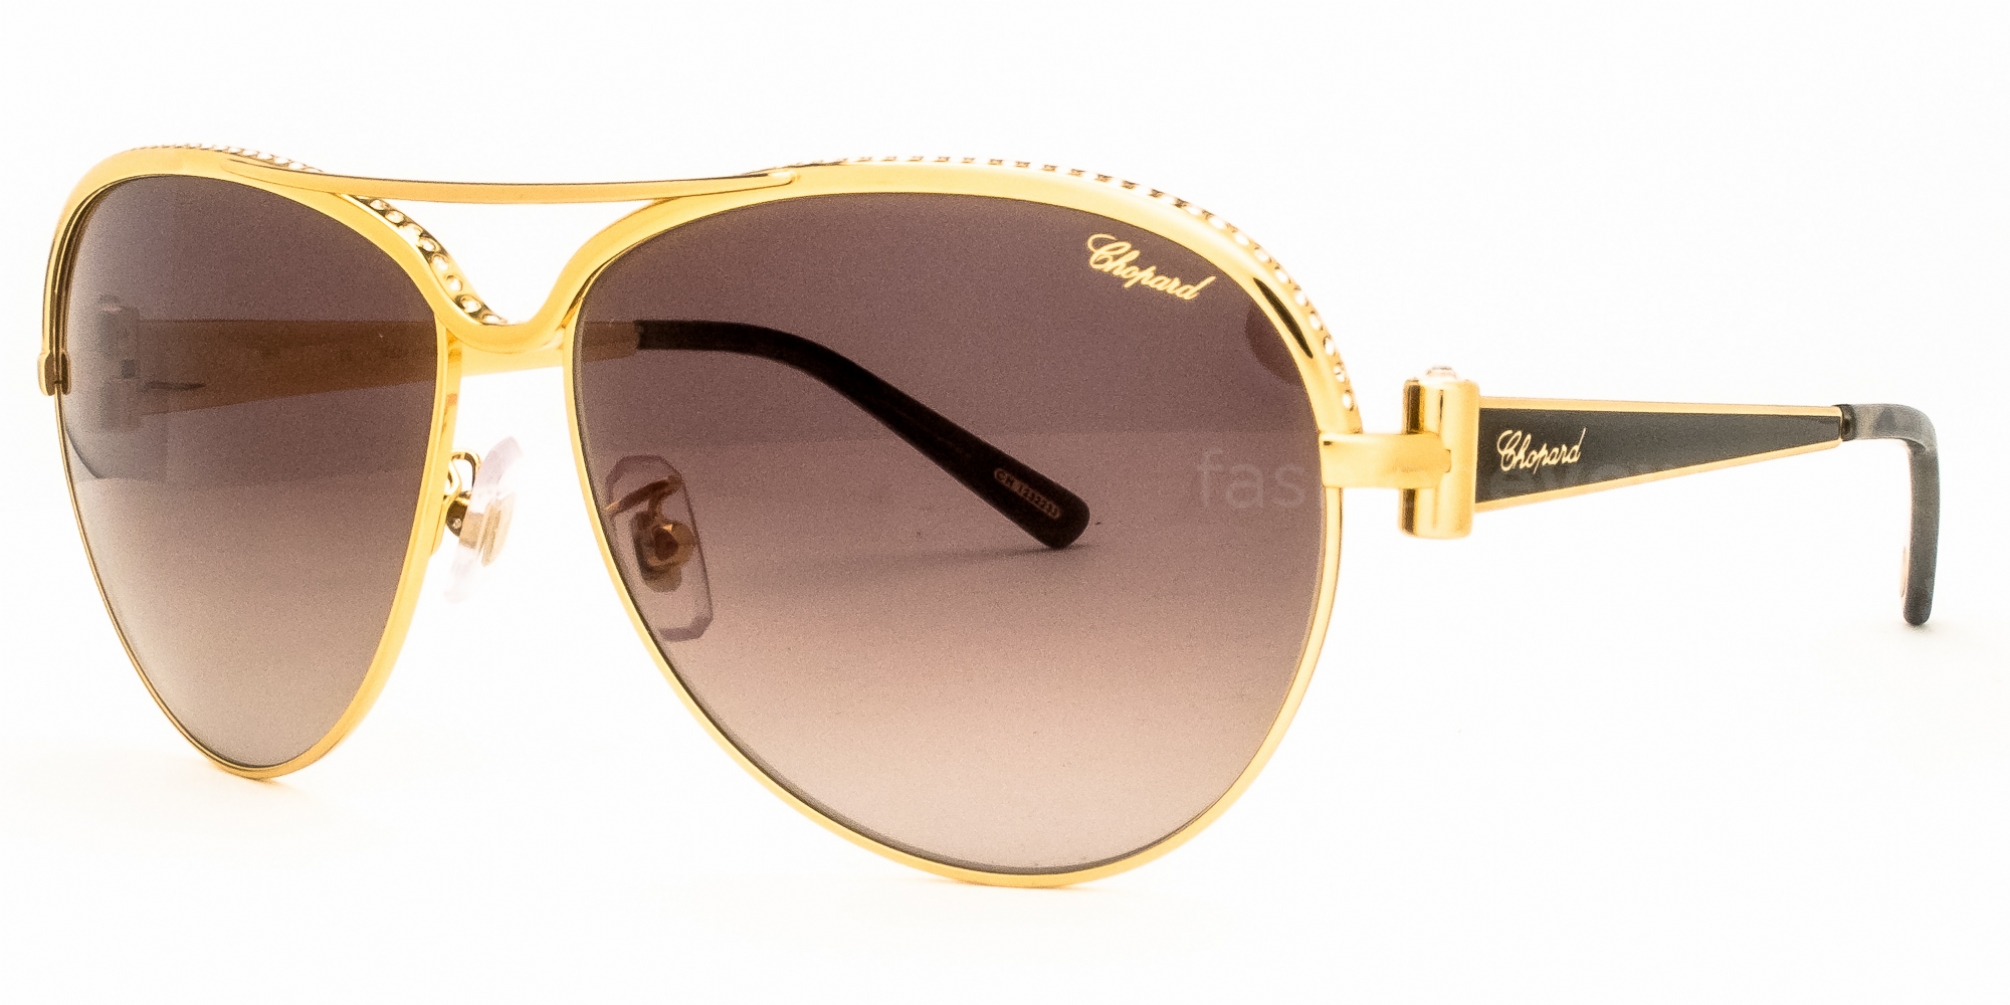 Buy Chopard Sunglasses directly from OpticsFast.com